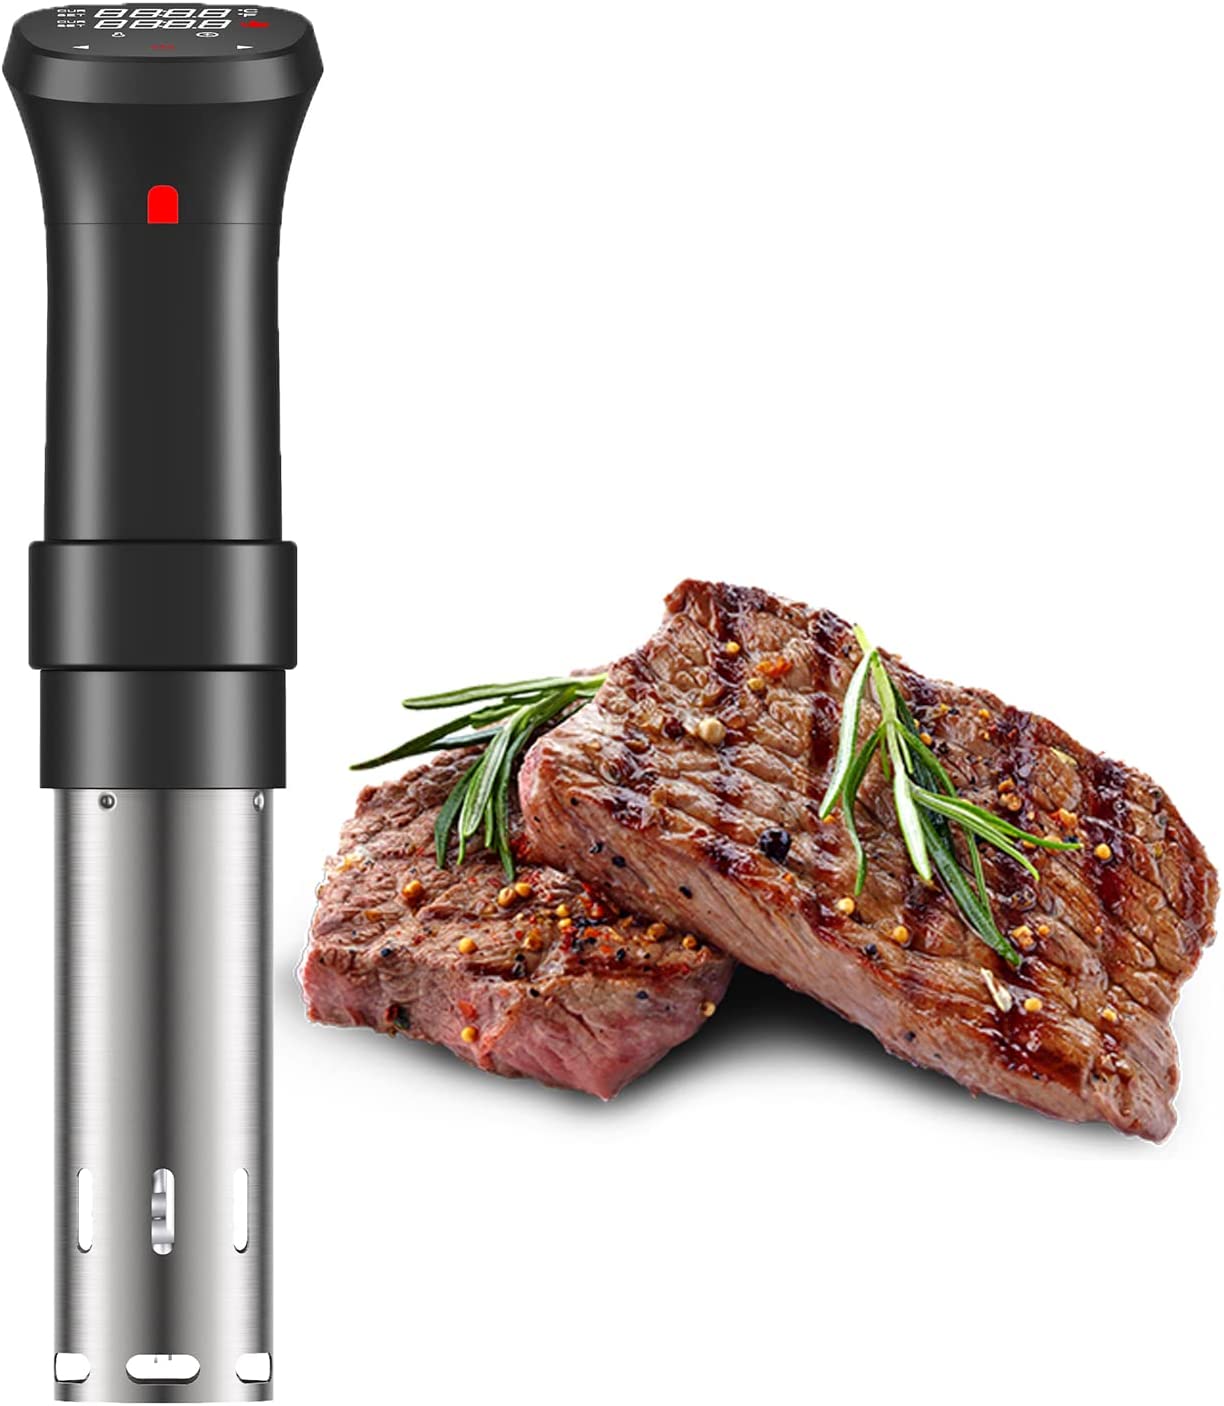 Fityou Precision Timer Sous Vide Immersion Cooker, 1100-Watt